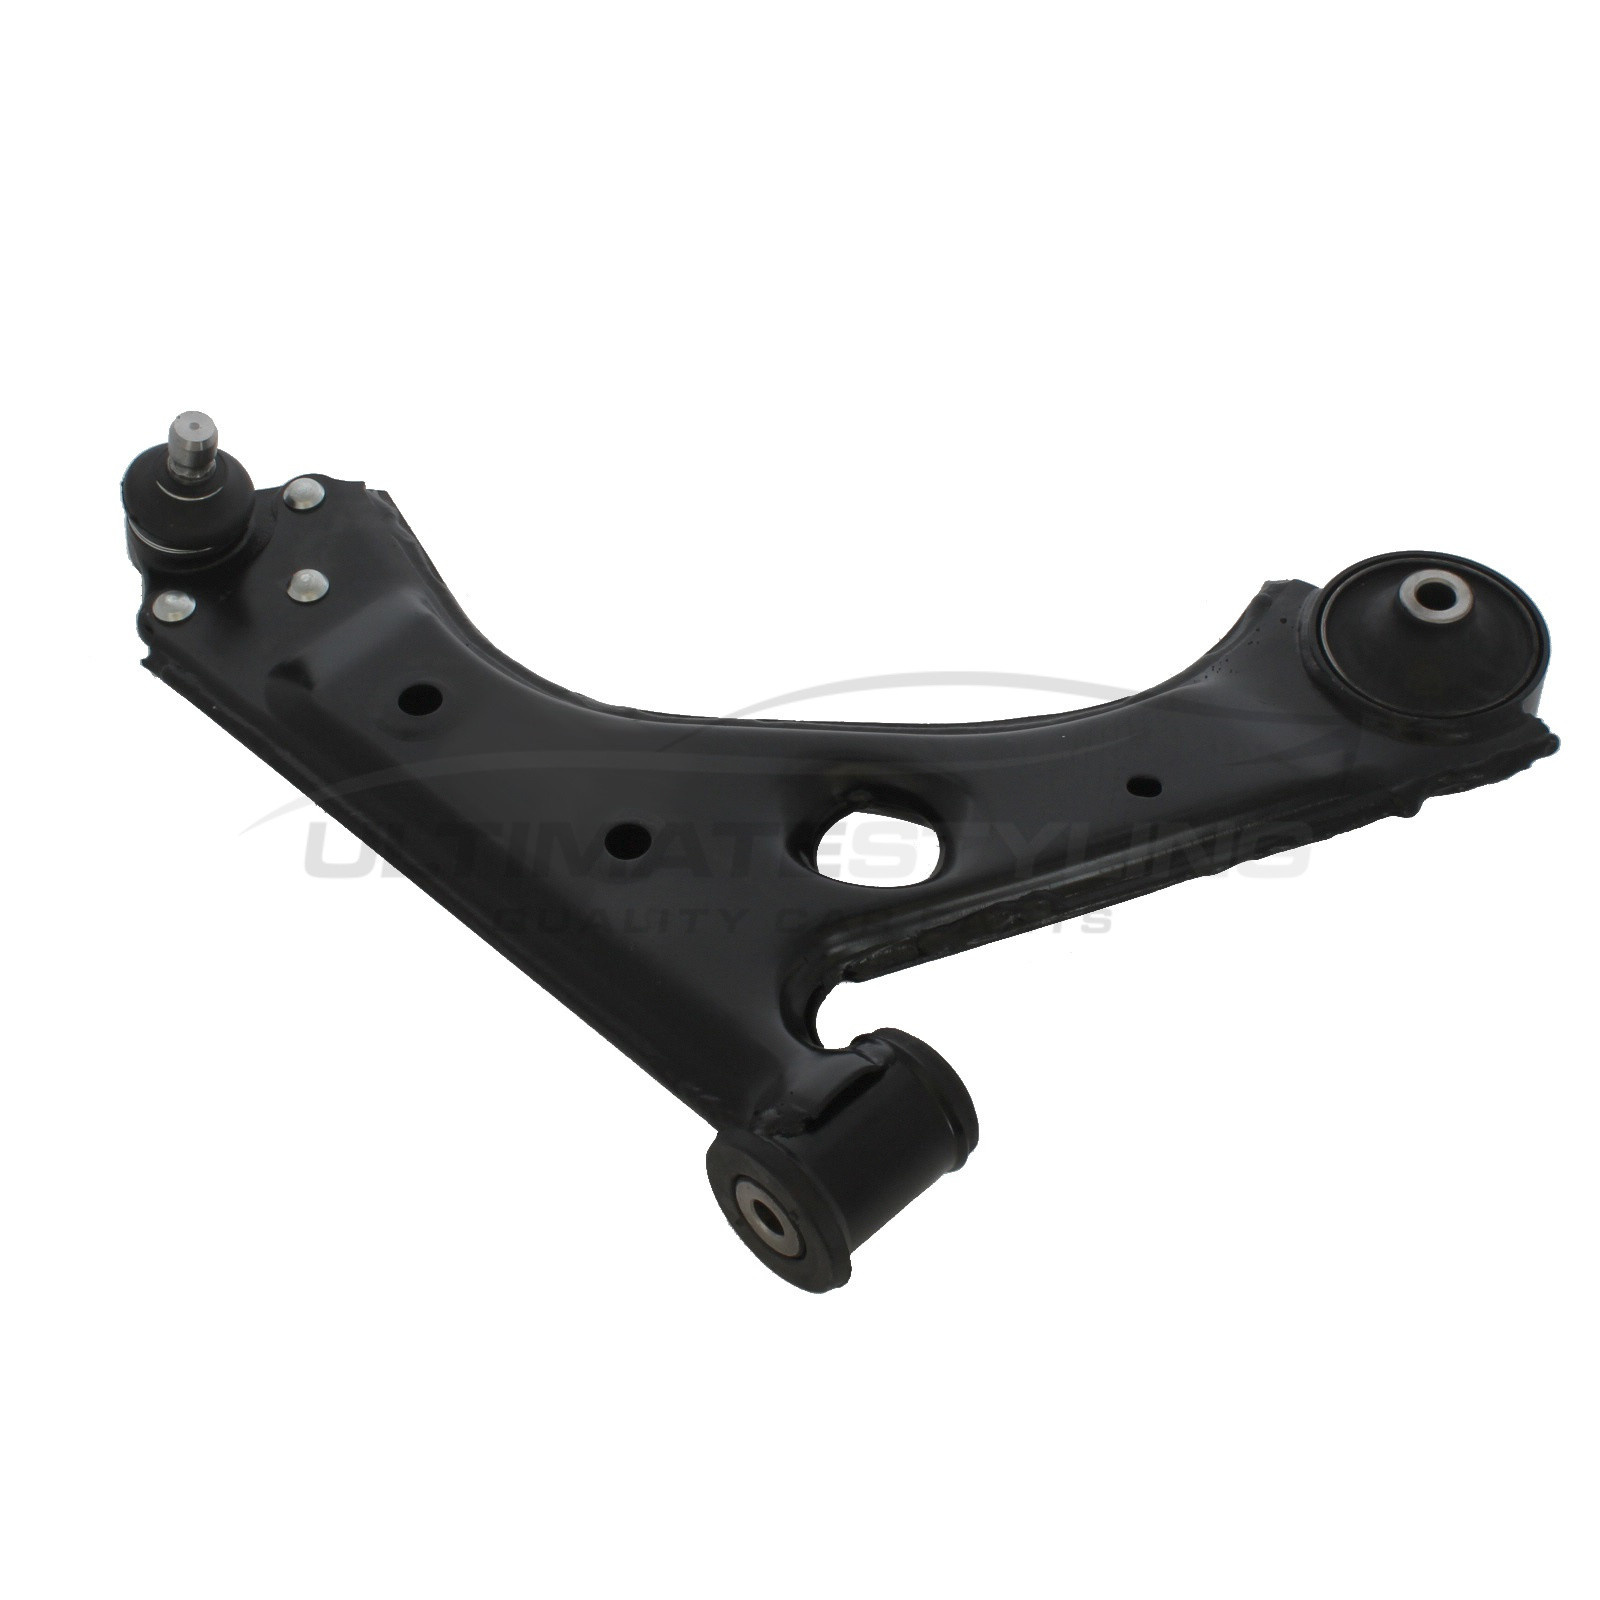 Vauxhall Adam 2012-2019, Vauxhall Corsa 2006-2015 Front Lower Suspension Arm (Steel) Including Ball Joint and Rear Bush Driver Side (RH)